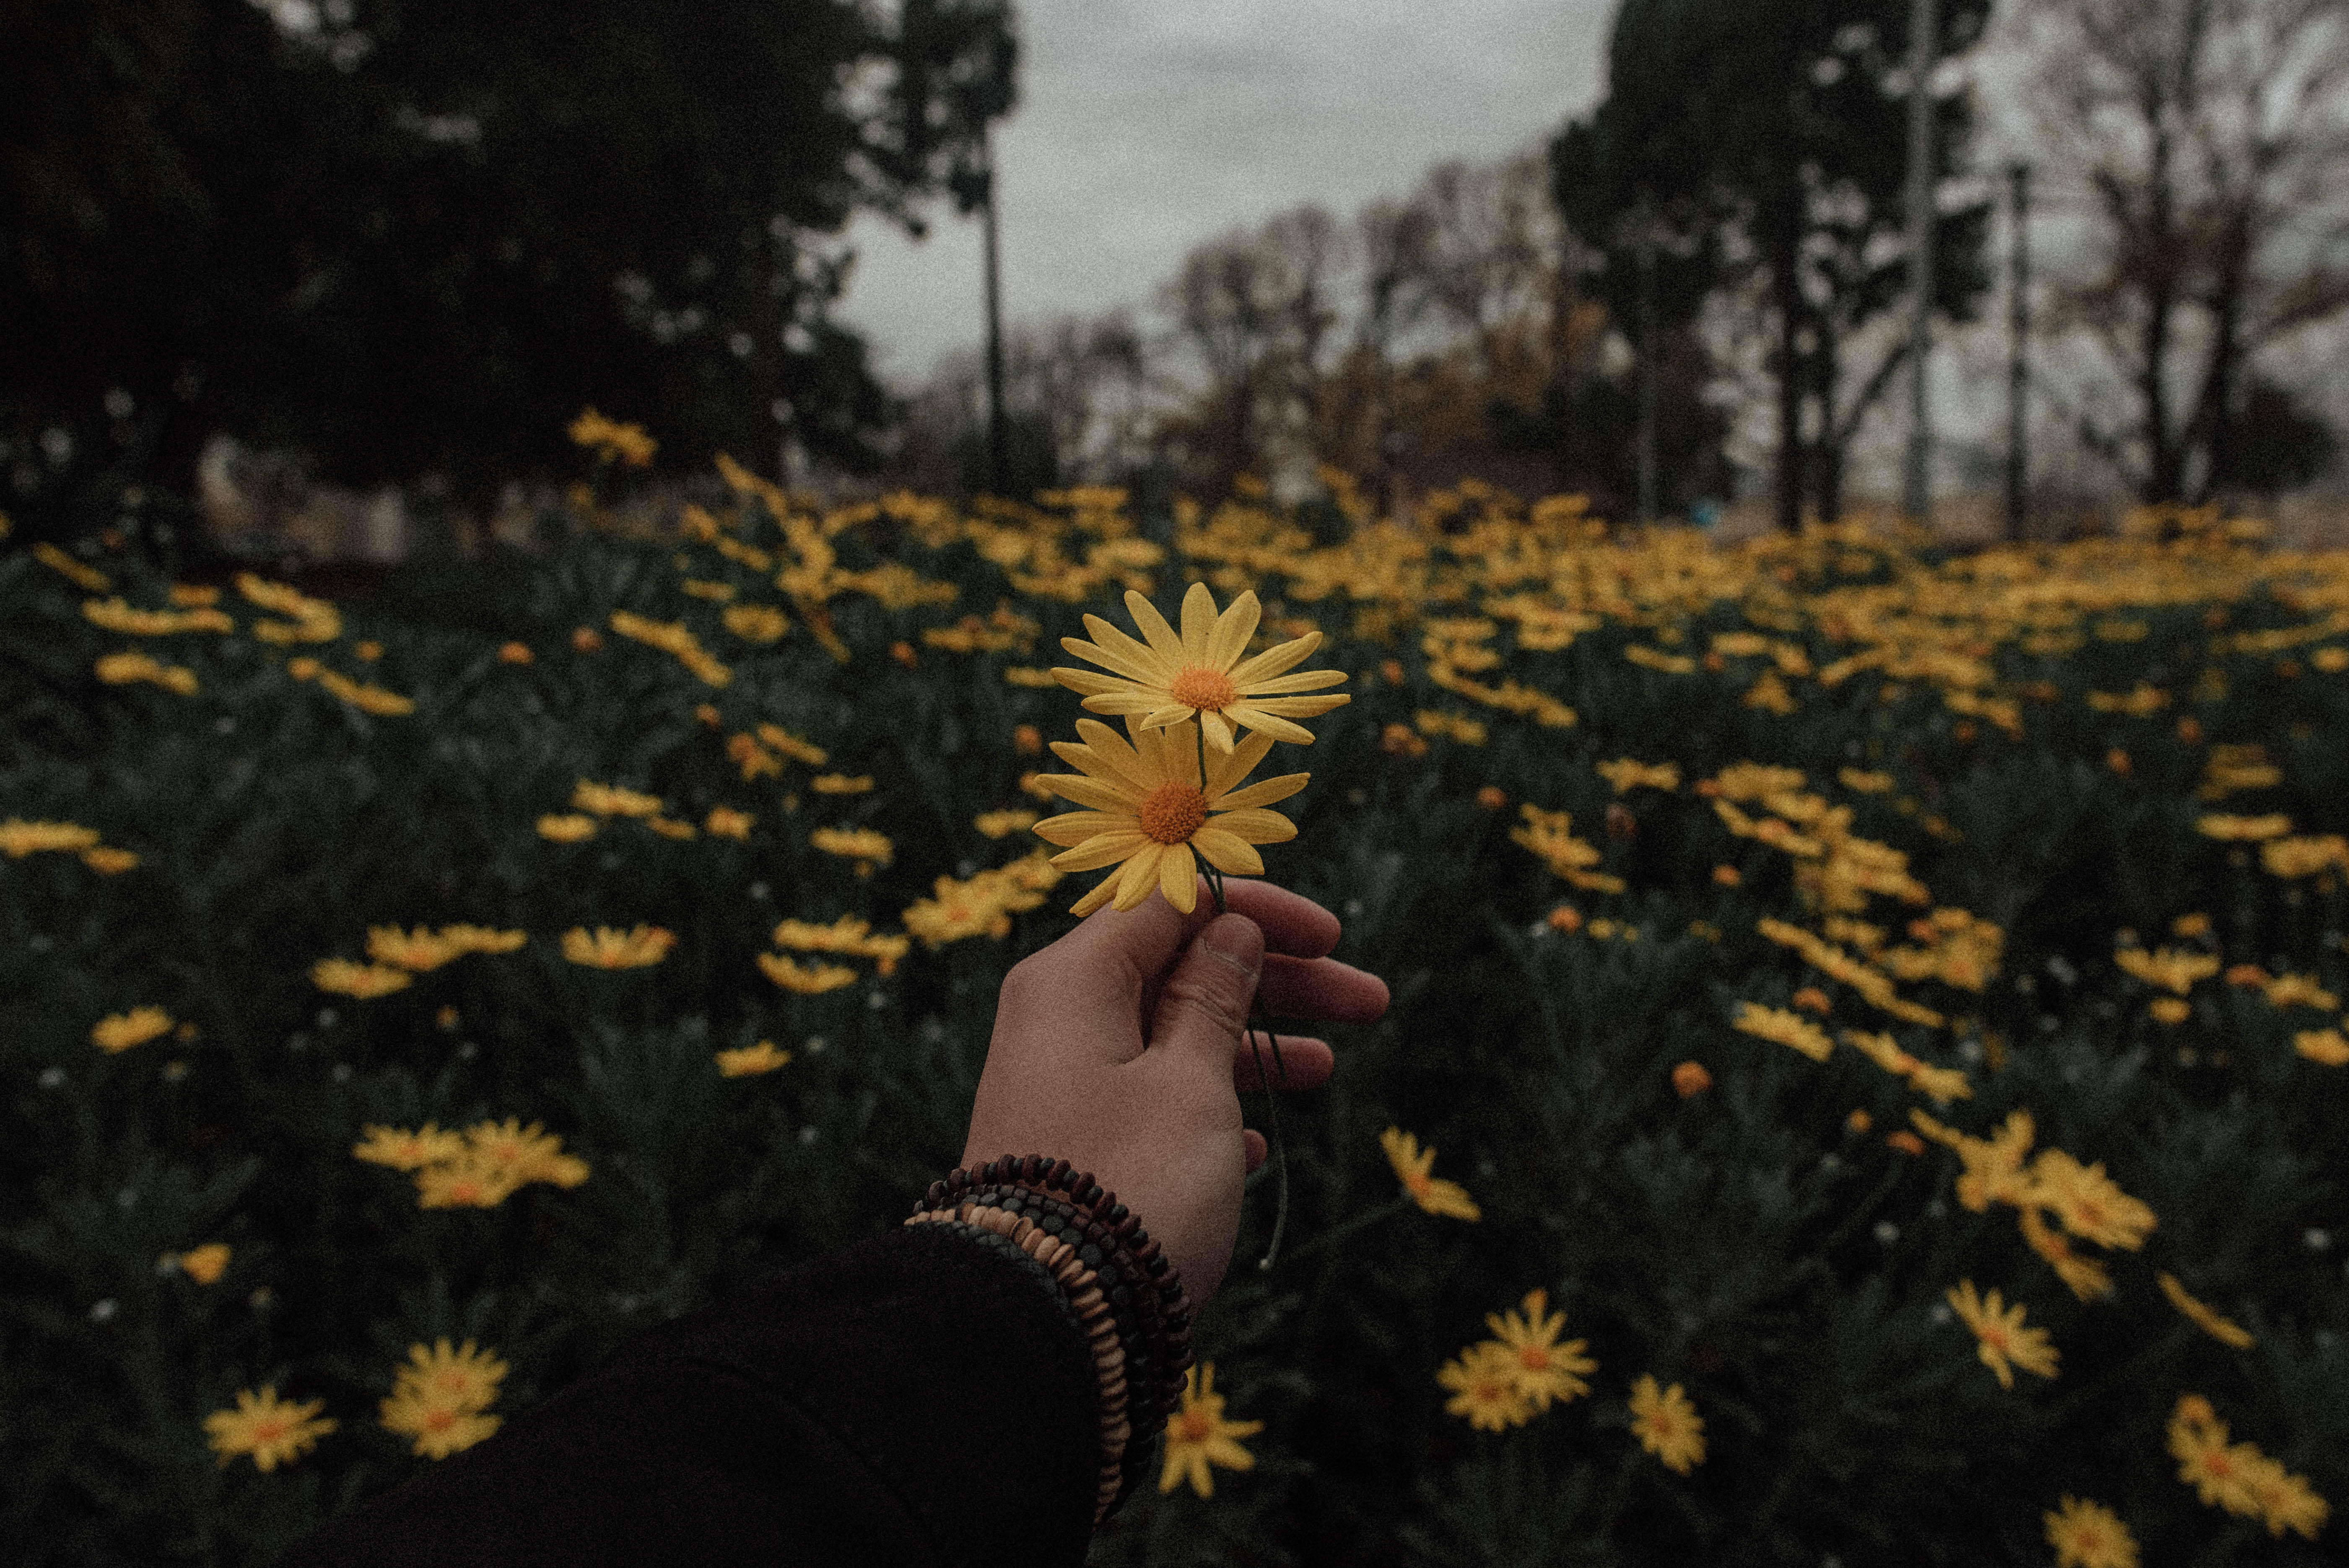 5603x3740 vintage, aesthetic, holding out flower, lve, flower, flowers, Free picture, retro, yellow, tumblr, grunge, love, hand, field, yellow flower Gallery HD Wallpaper